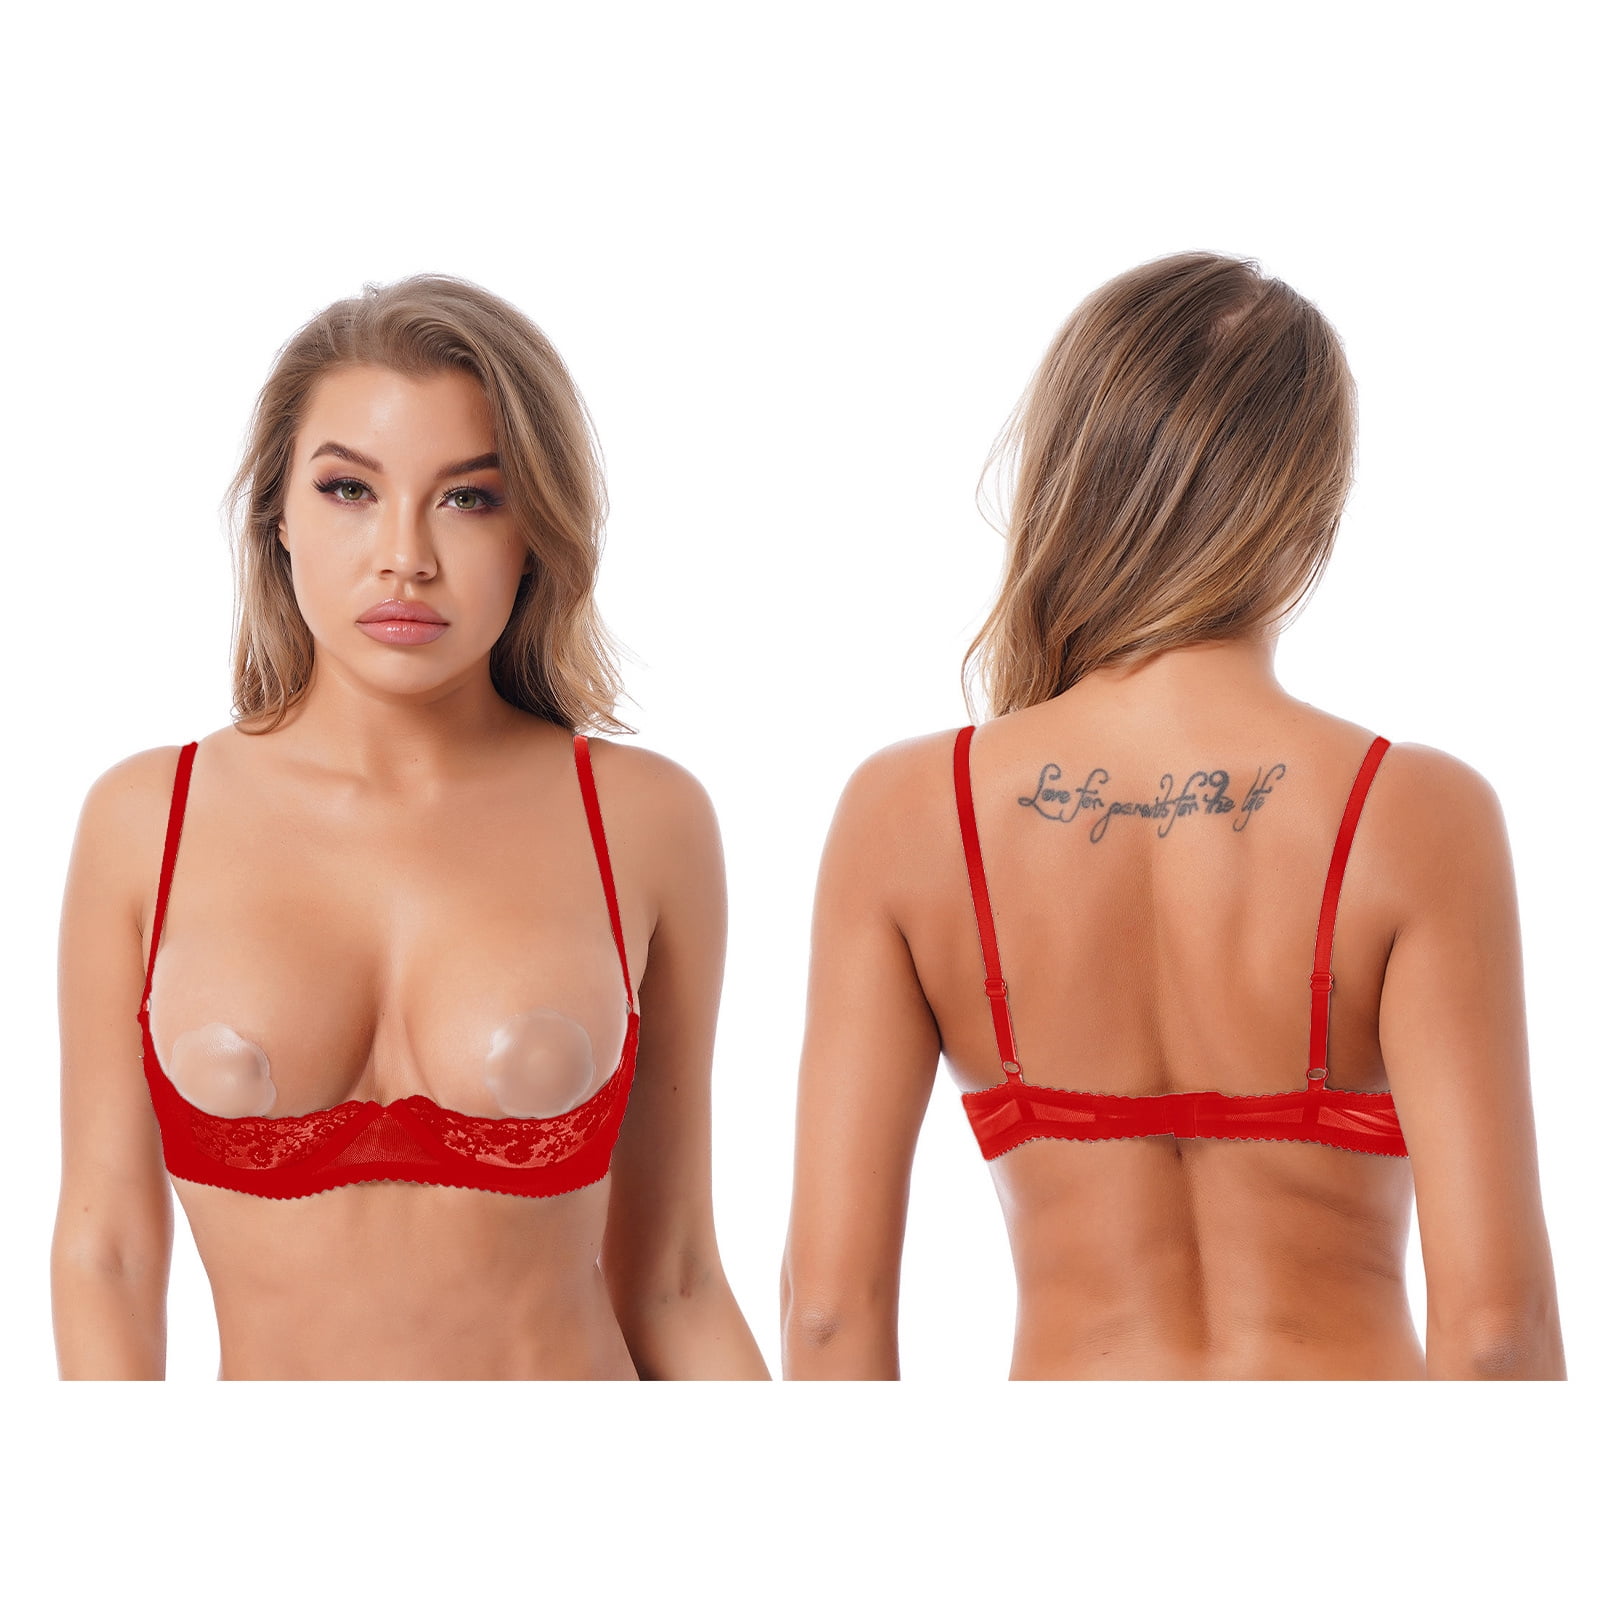 MSemis Women's Hollow Out Lingerie Open Cups Bra Push Up